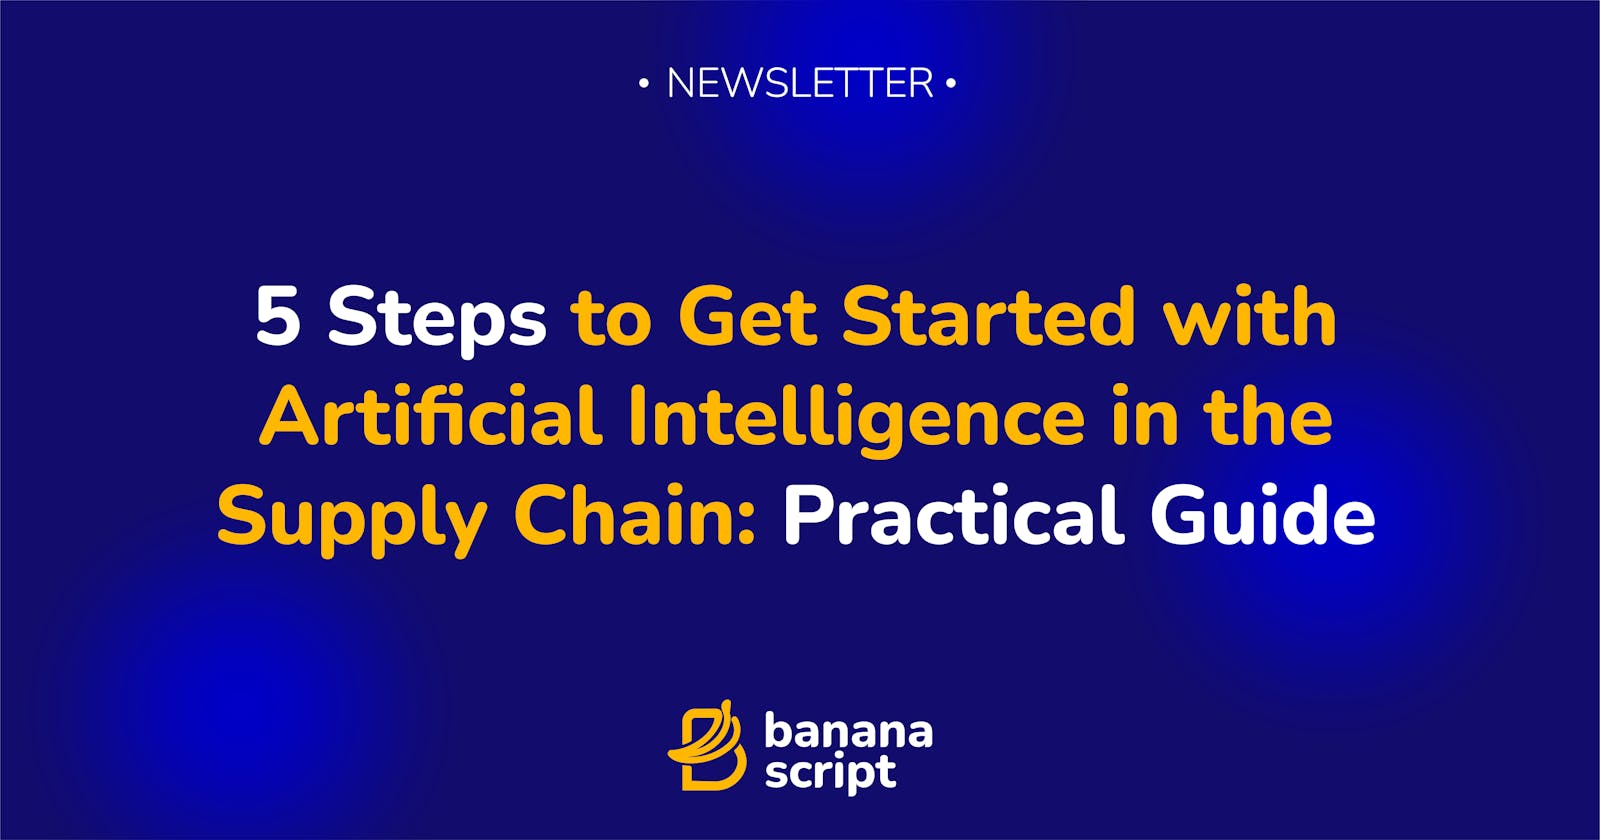 5 Steps to Get Started with Artificial Intelligence in the Supply Chain: Practical Guide